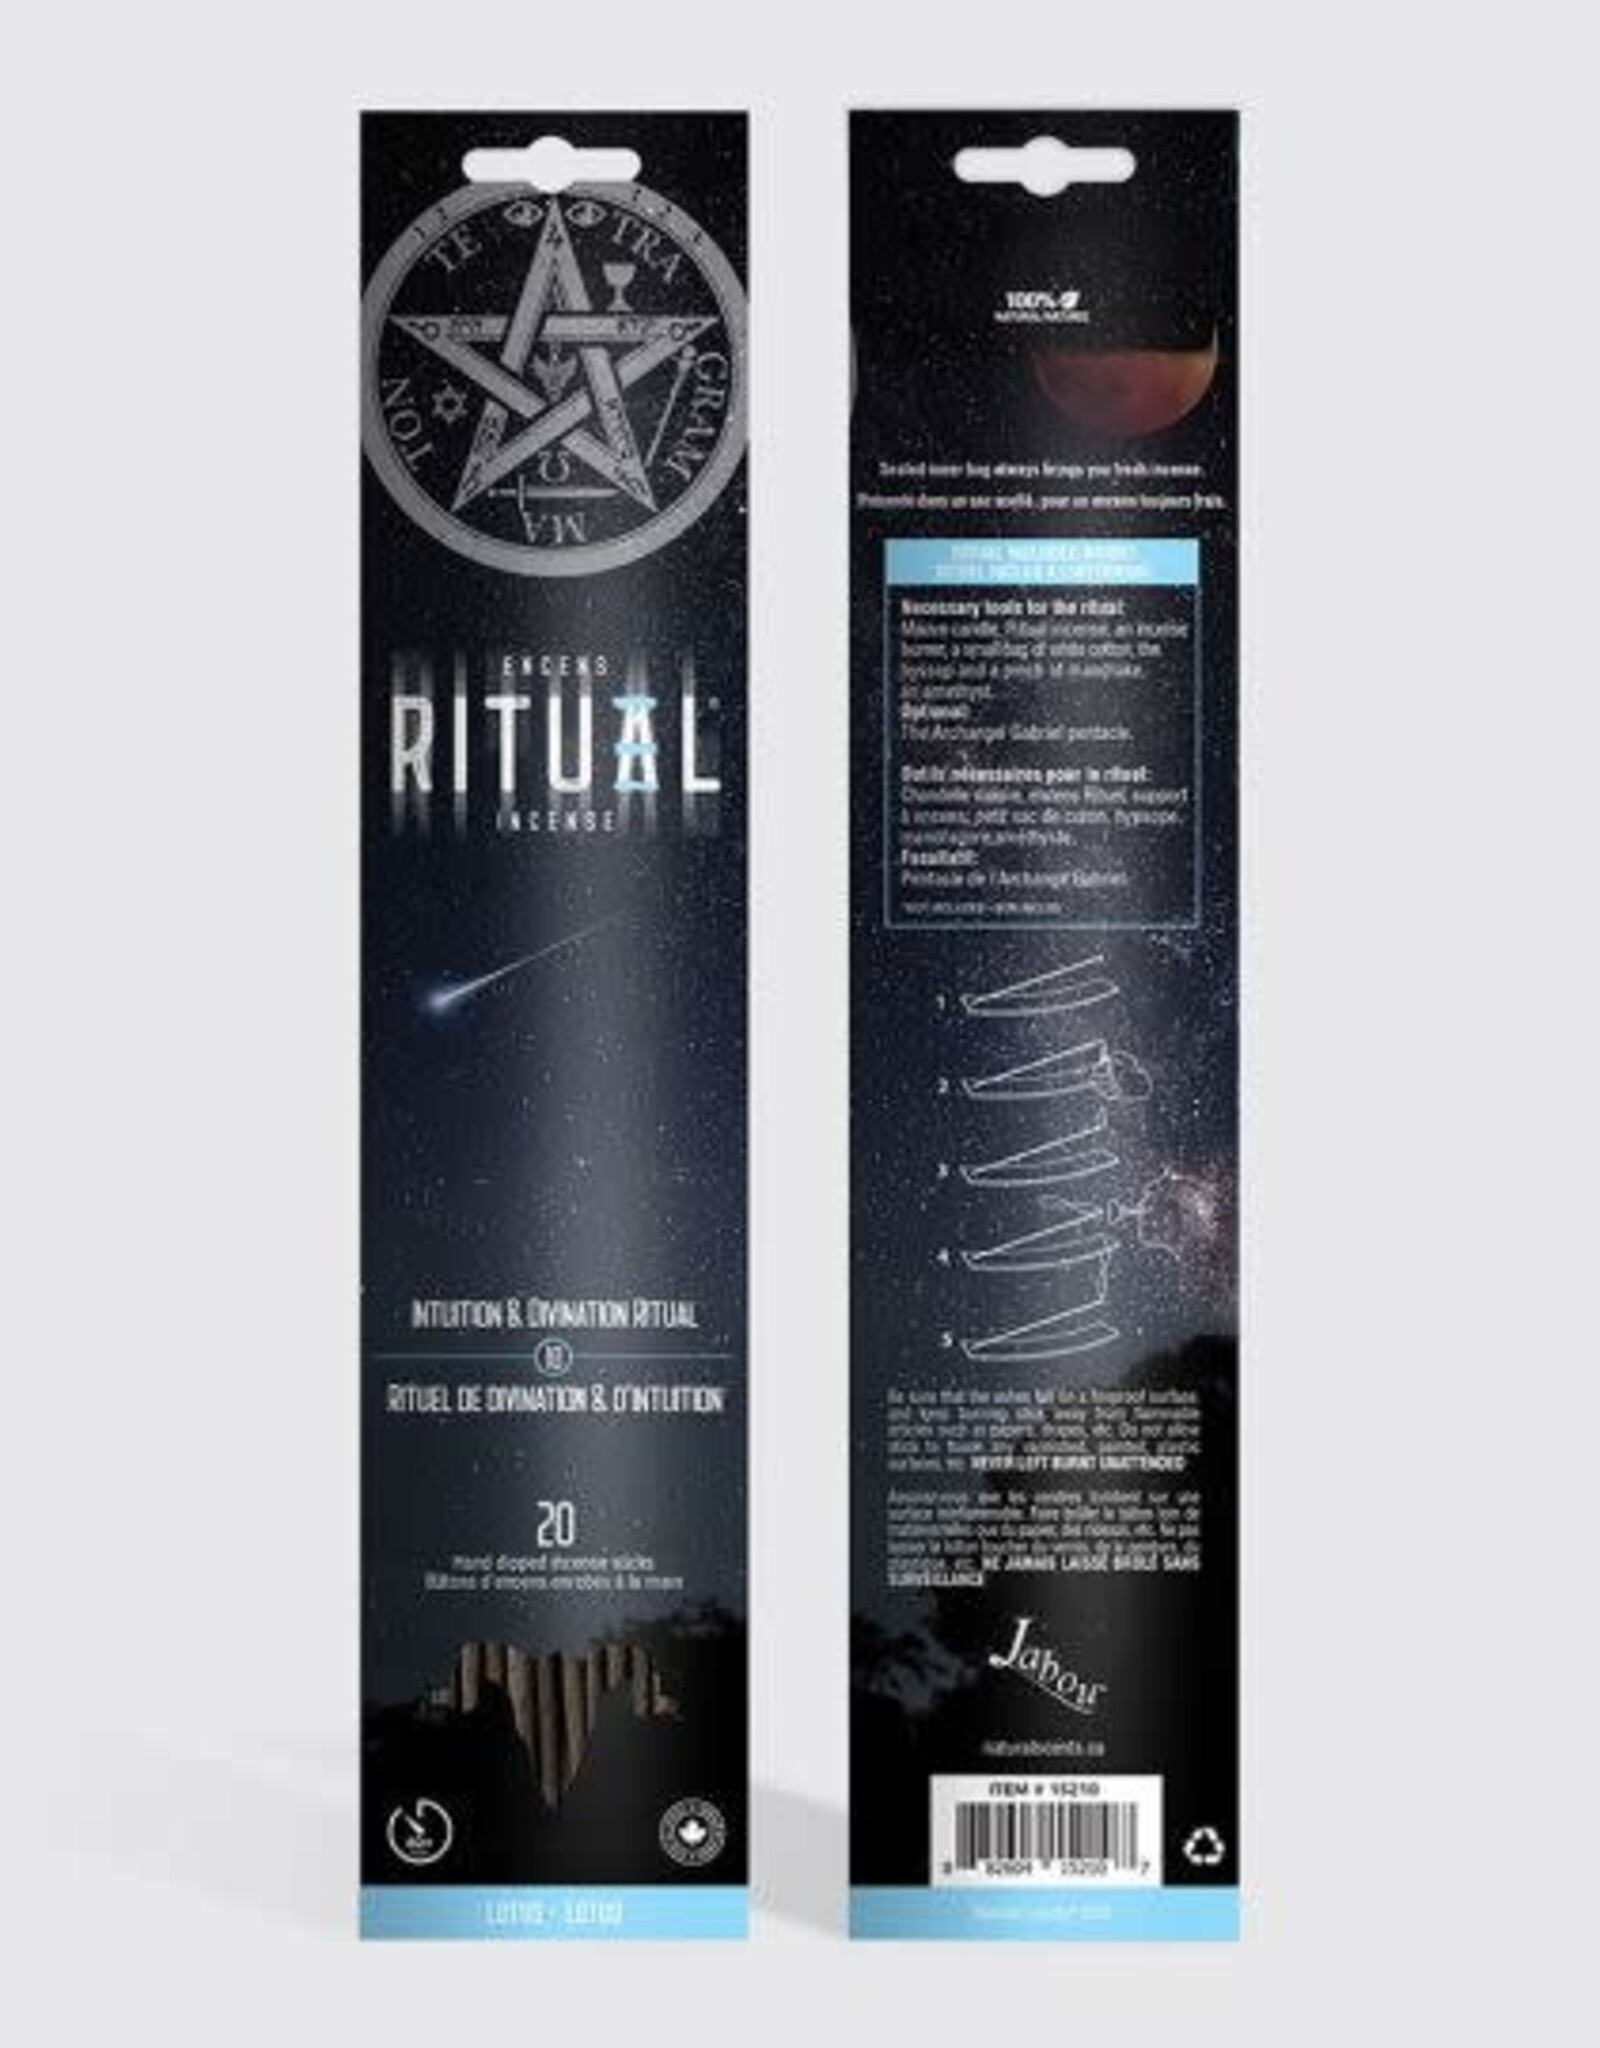 Ritual Incense: Intuition & Divination